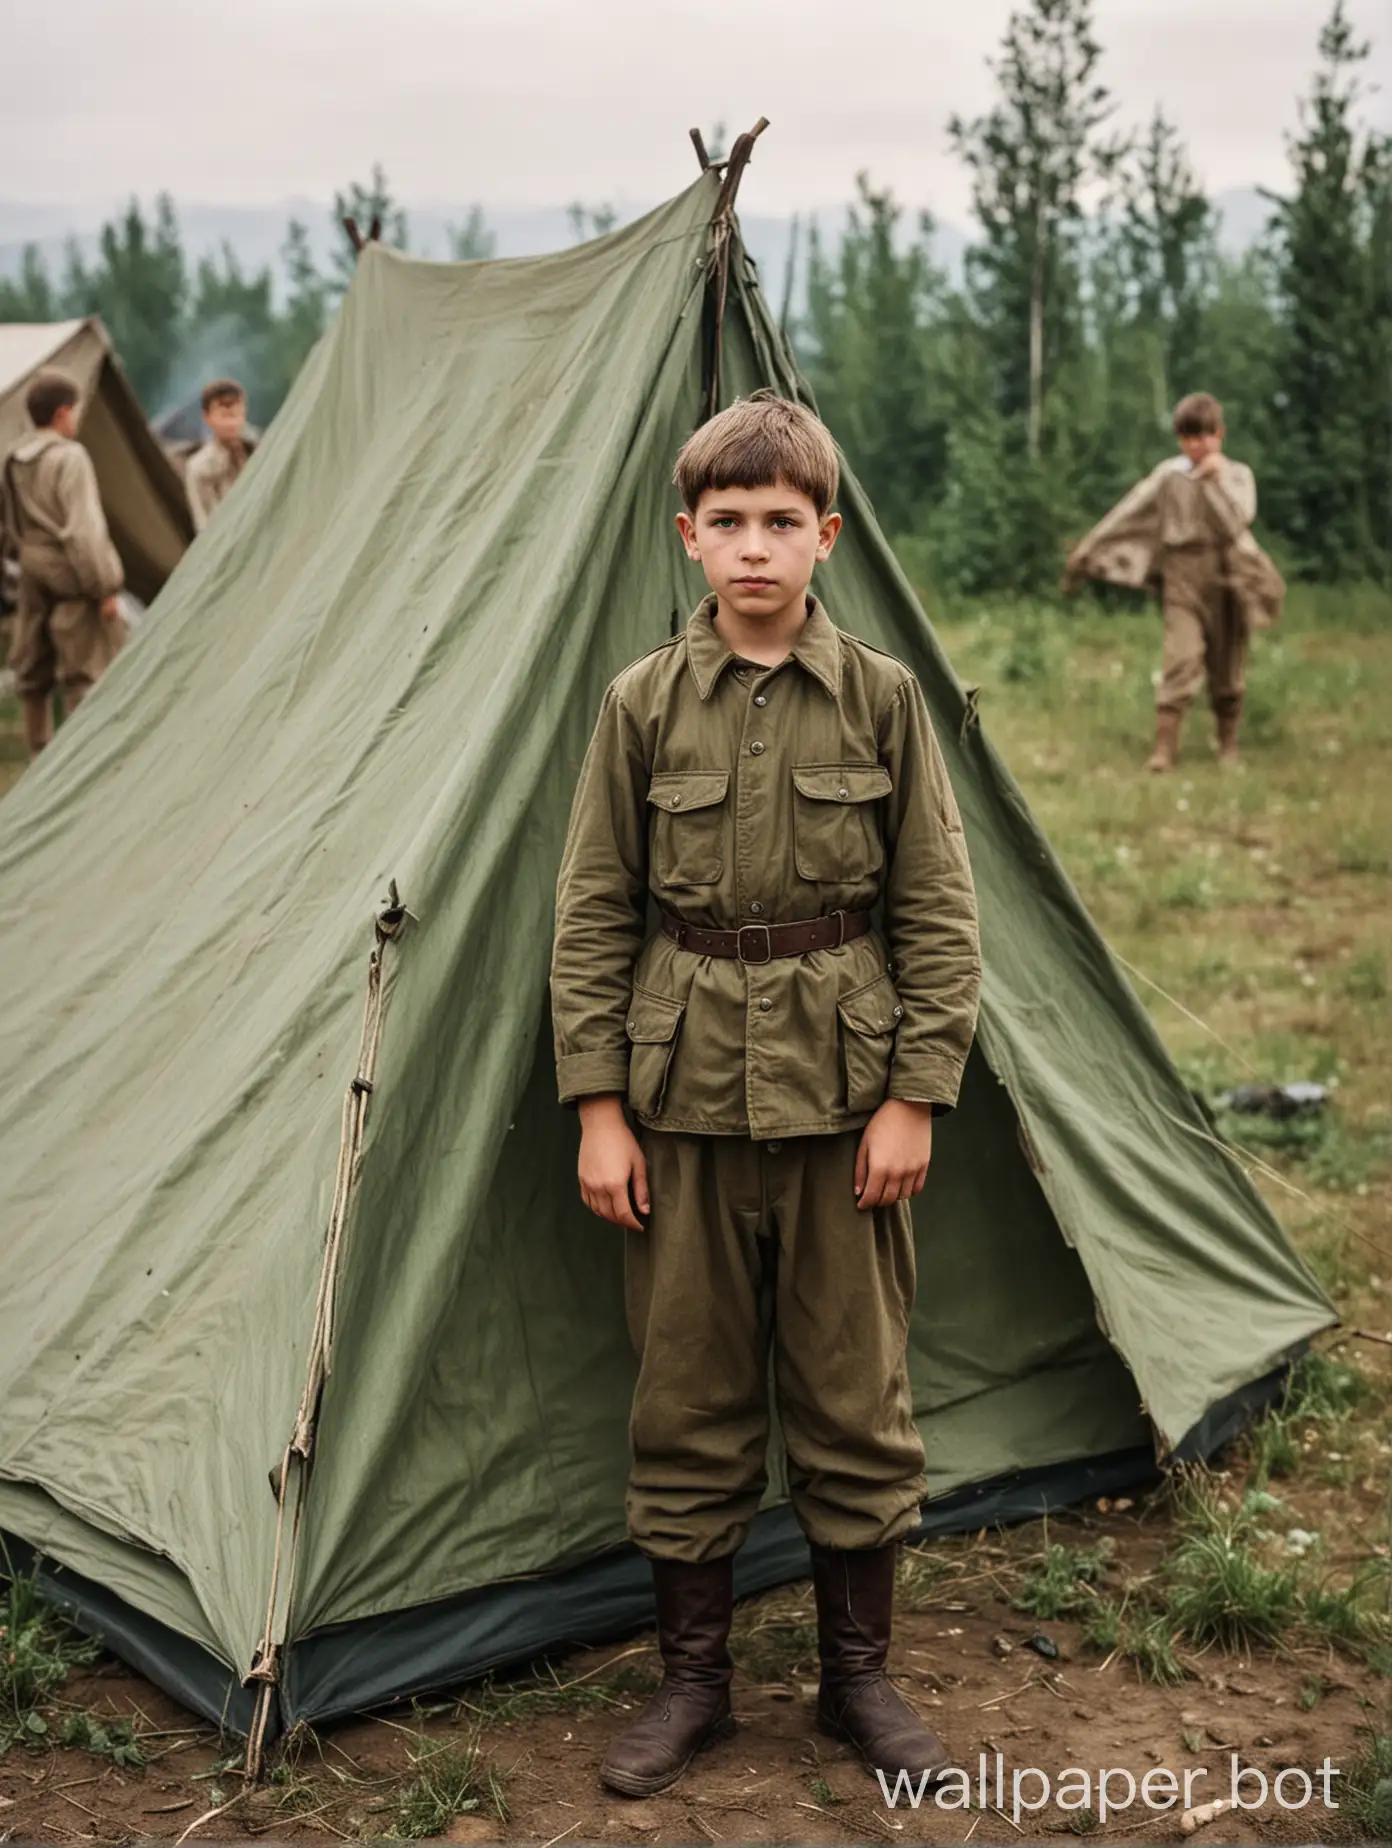 Soviet pioneer boy 13 years old, tent, full length, people in the background